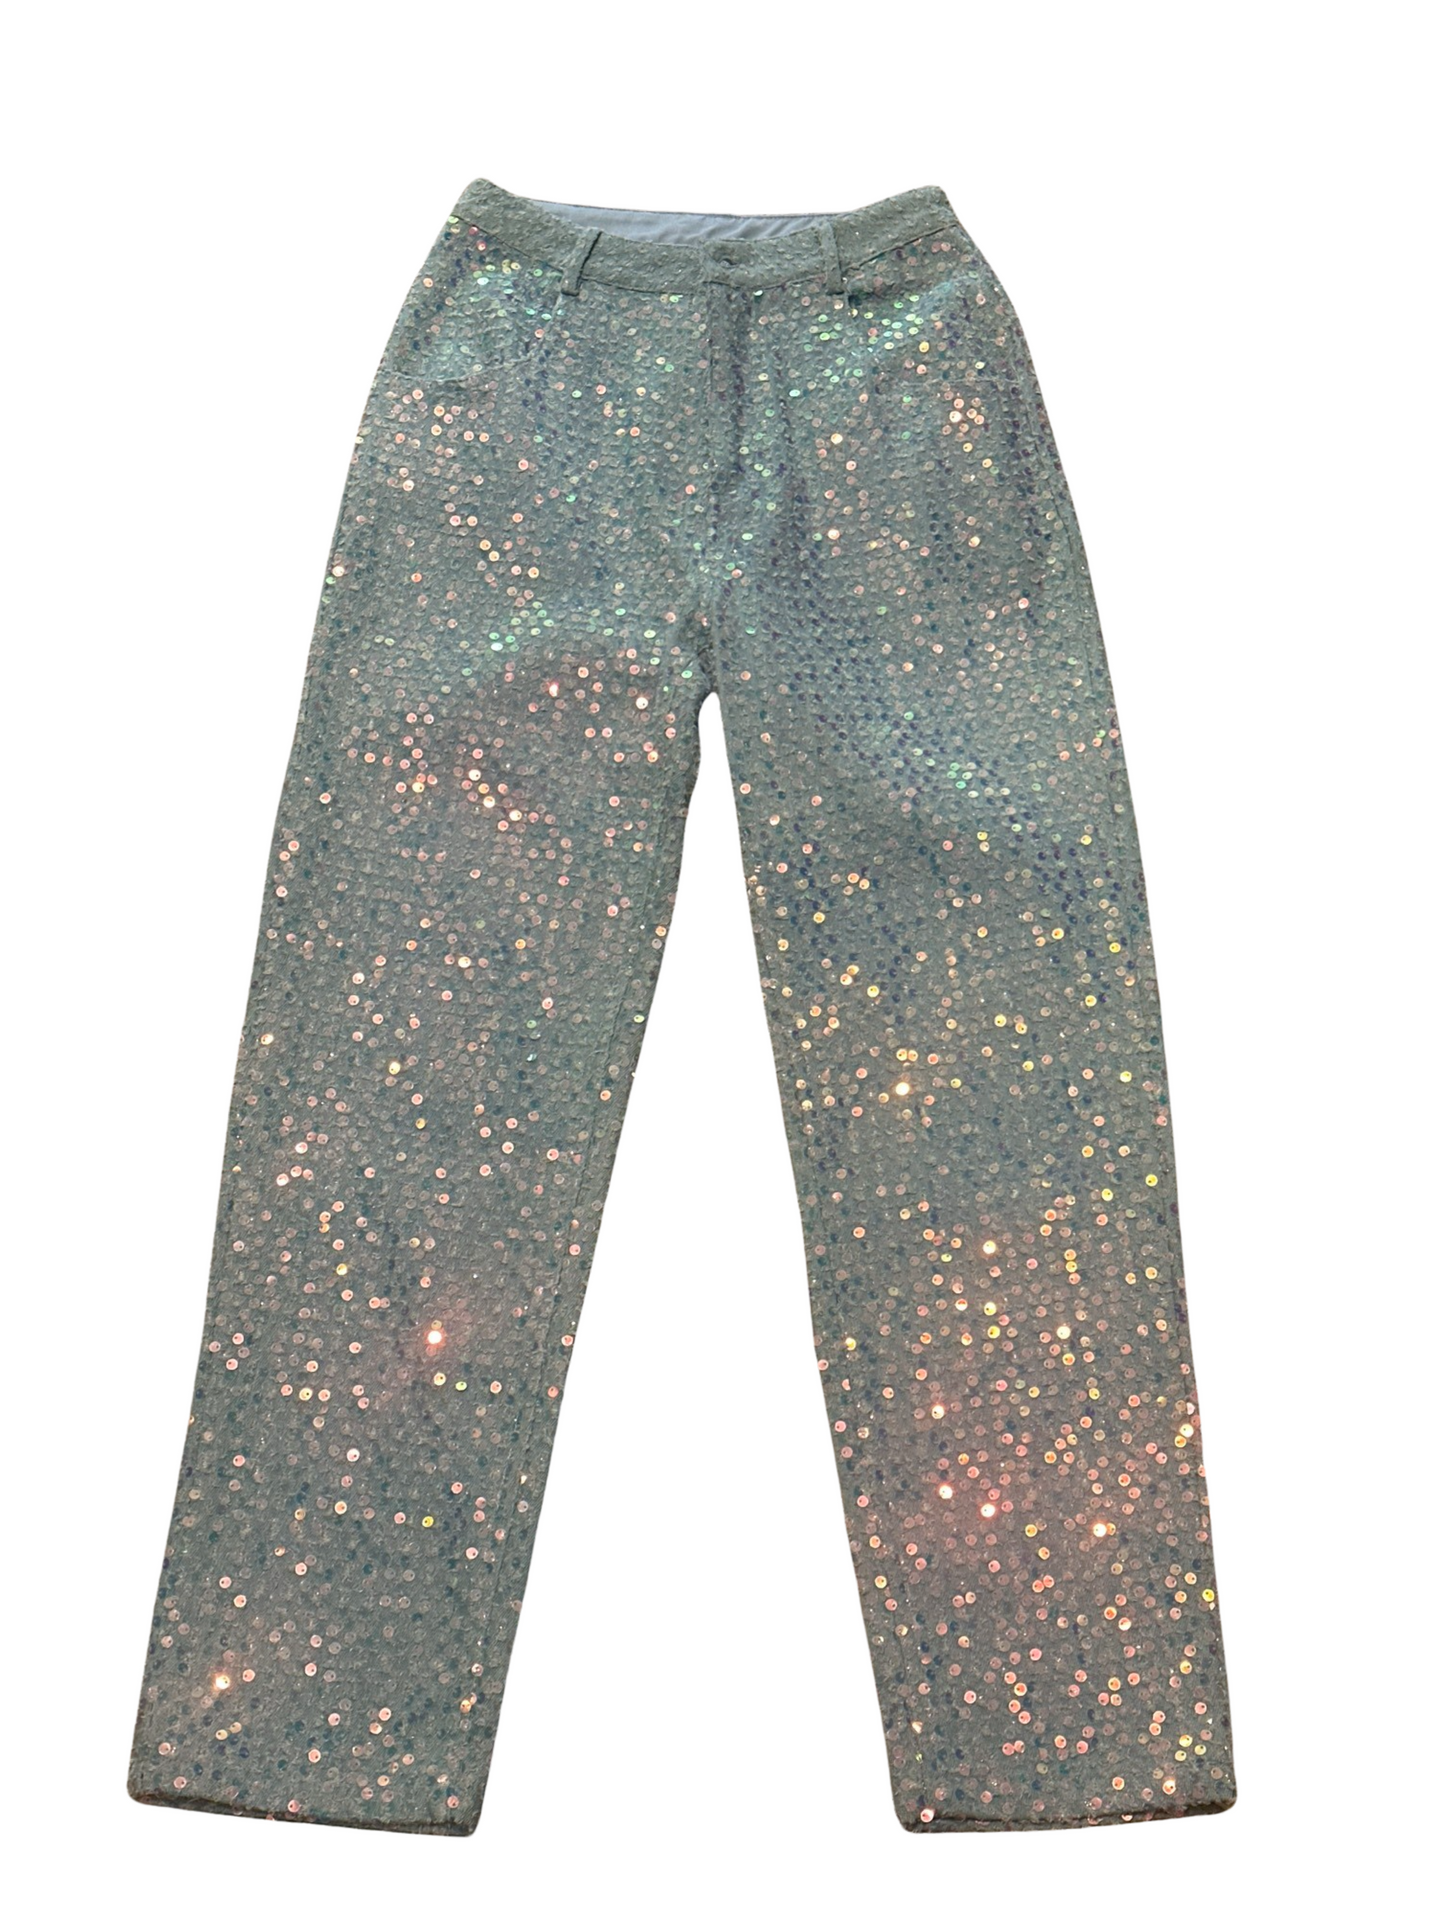 Dance and Marvel Sparkly Two Tone Metallic Sequins Jeans